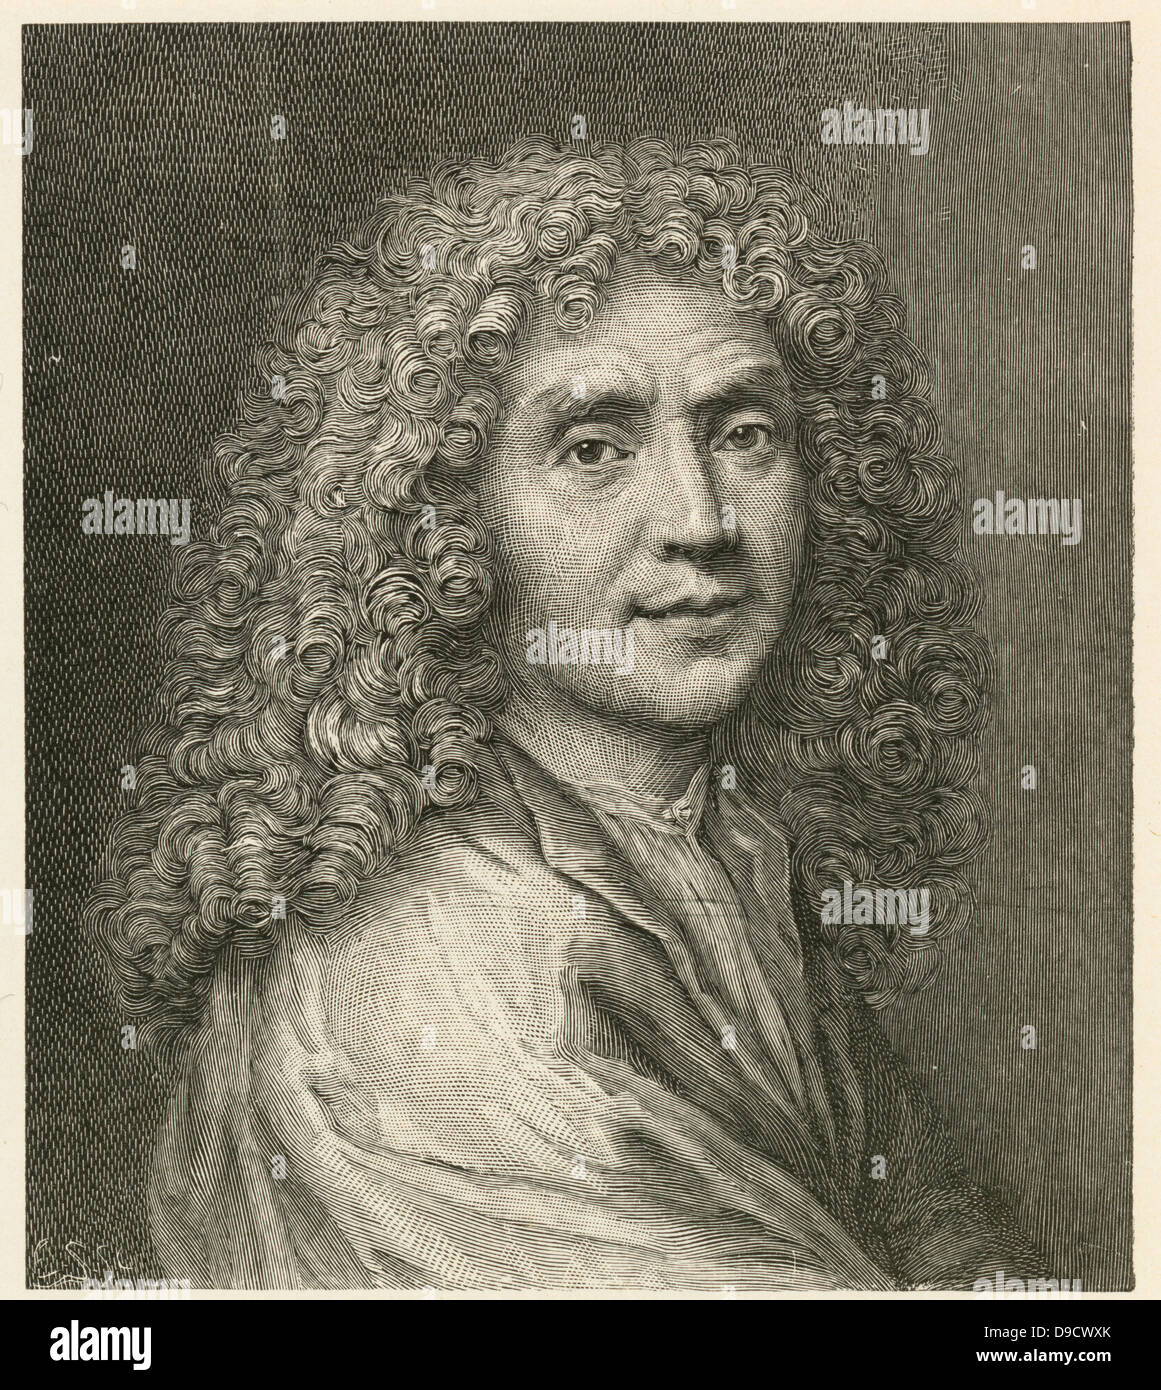 Jean-Baptiste Poquelin (1622-1673), known by his stage name Moliere, French playwright and actor.  He was one of the great masters of comedy. Engraving. Stock Photo